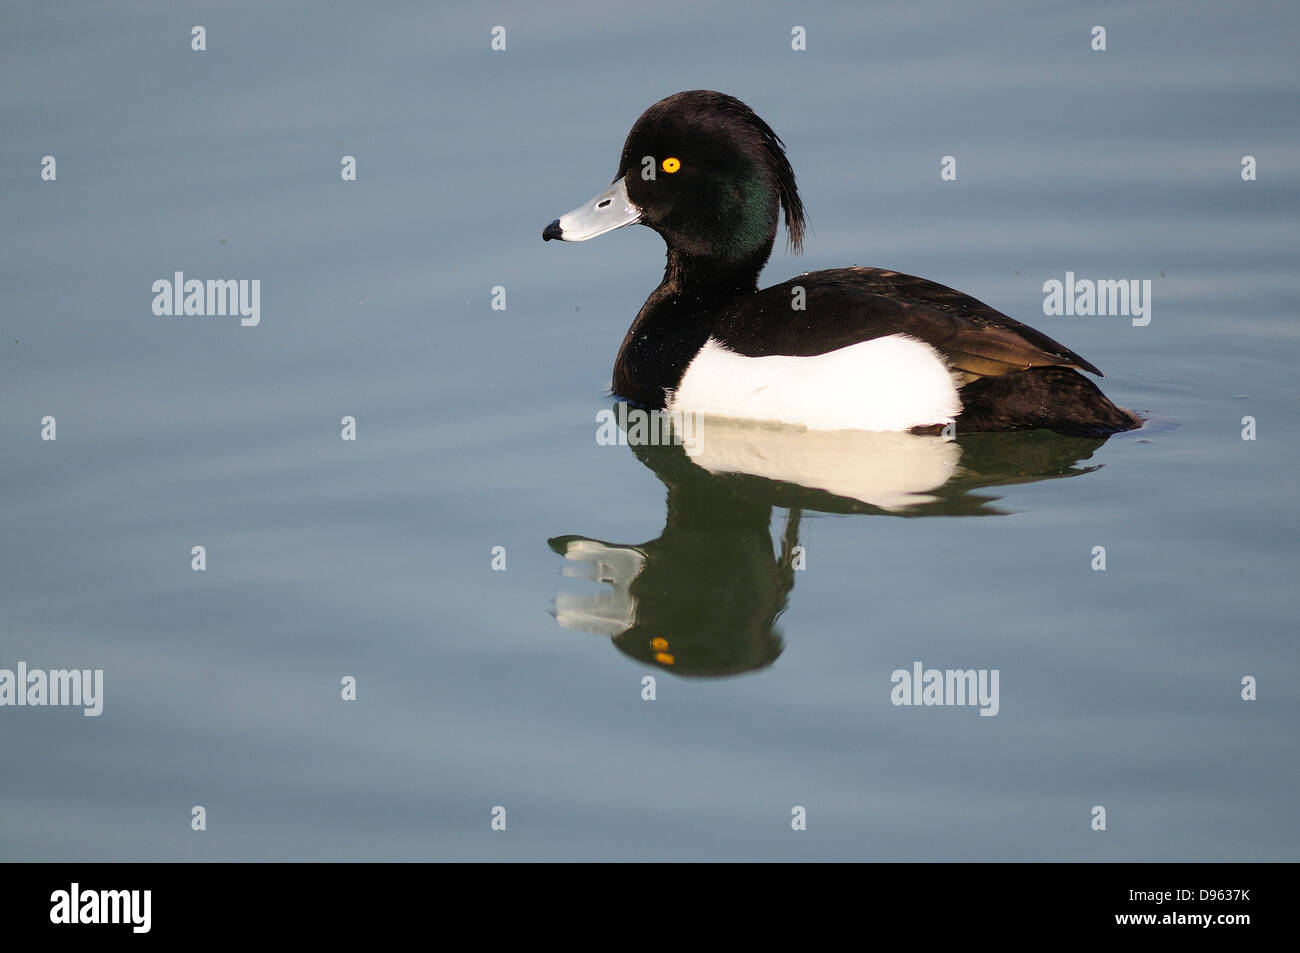 A male tufted duck swimming on calm water Stock Photo